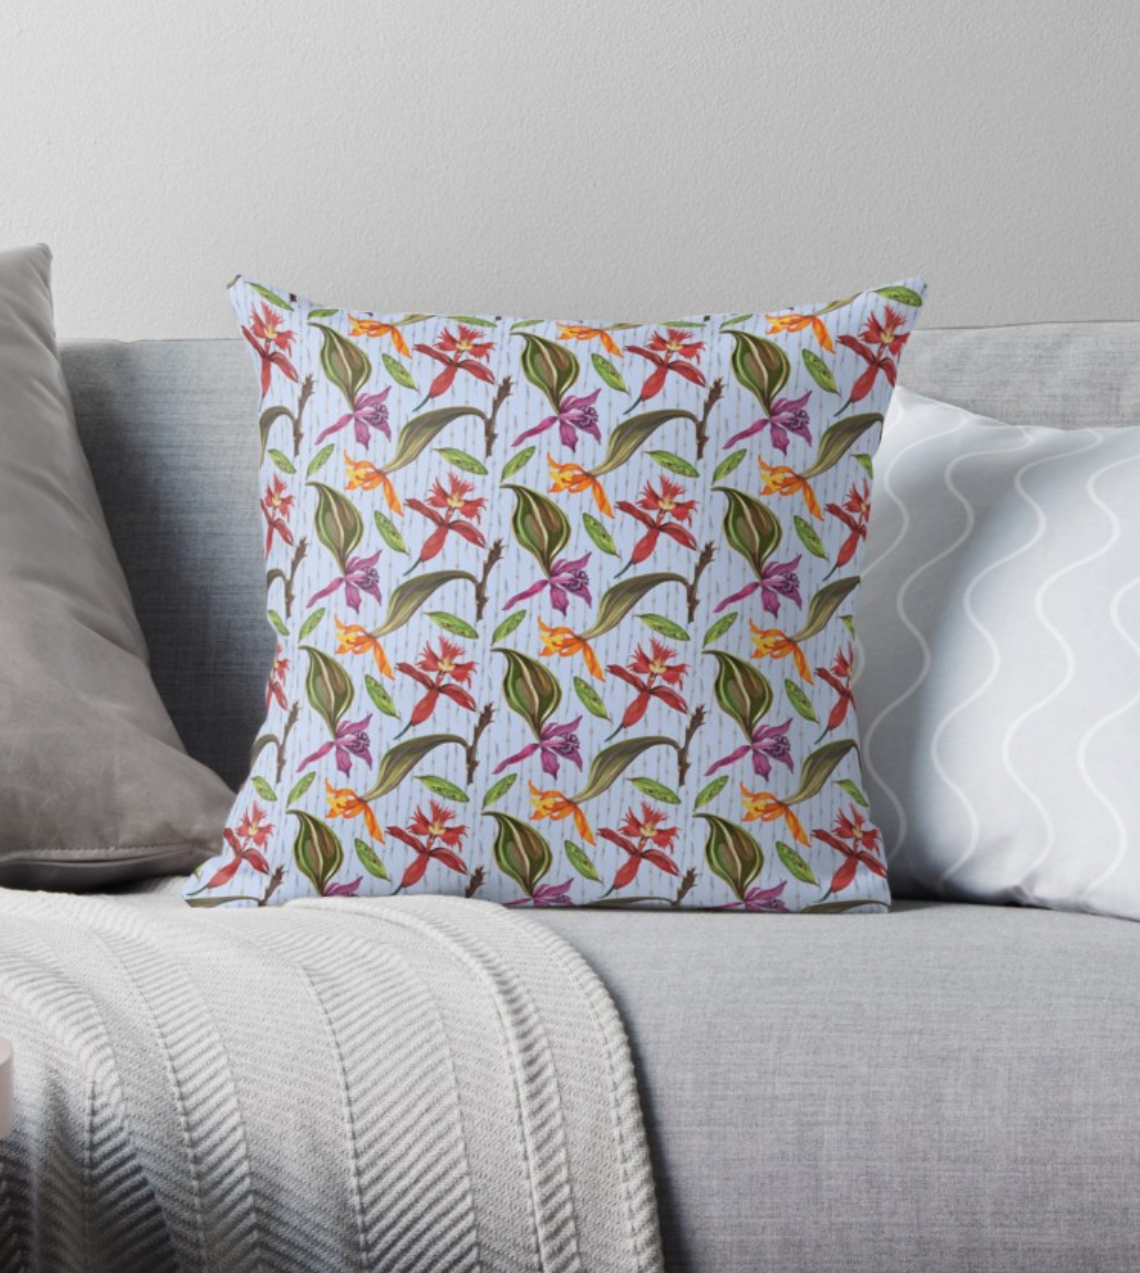  https://www.redbubble.com/people/christinemay/works/16519540-orchids-and-ink-flowers?grid_pos=27&amp;p=throw-pillow&amp;rbs=53315a0c-92e0-456c-a878-74ba9e6f6286&amp;ref=artist_shop_grid 